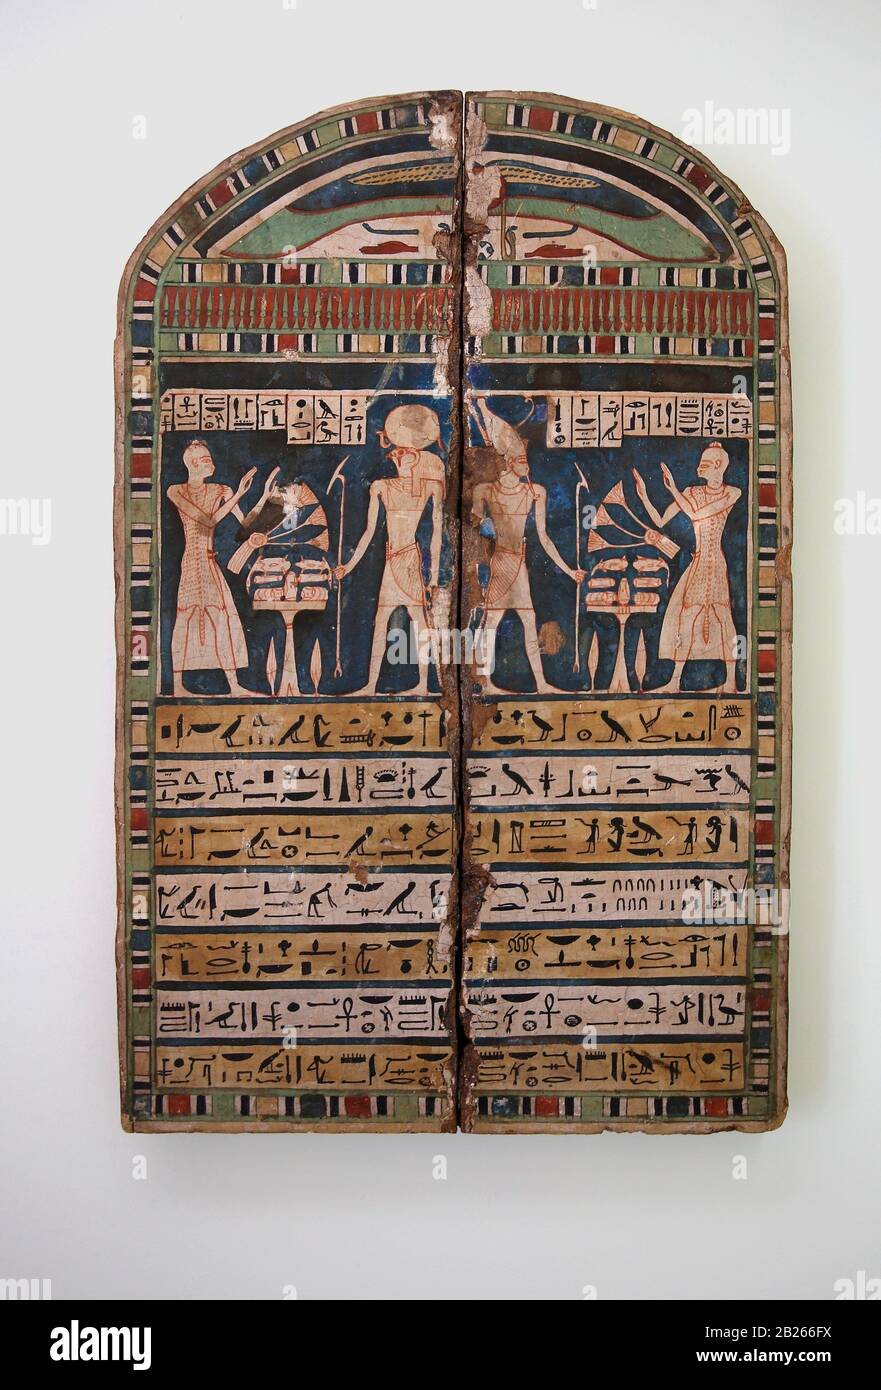 Egyptian stele with offering scene. No provenance, no time period. Collection of Orient Art,Istanbul Archaeological Museum, Turkey. Stock Photo